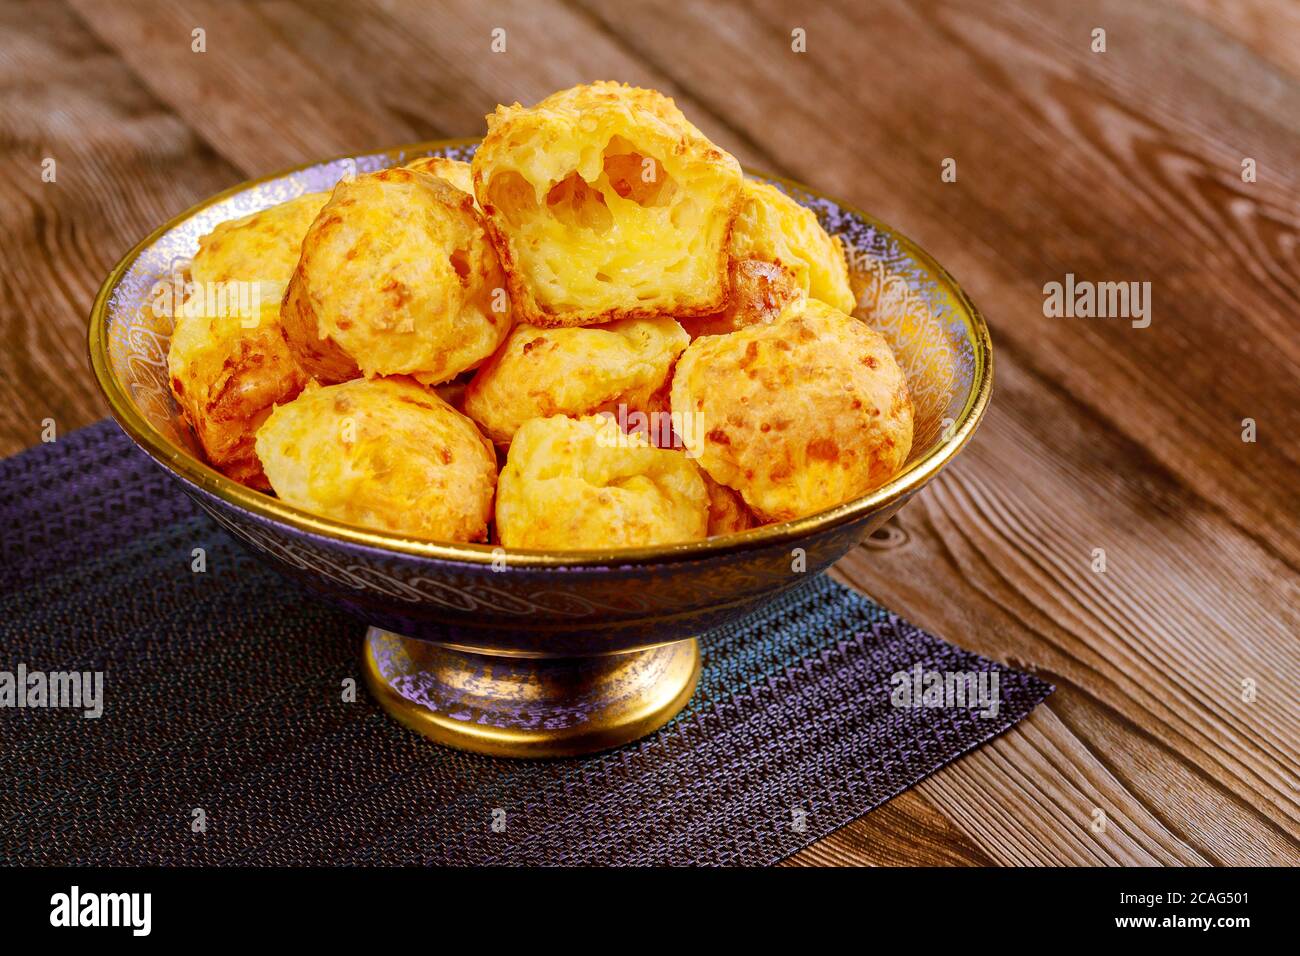 Chewy cheese bread called chipa on wooden table. Brazilian cuisine. Stock Photo